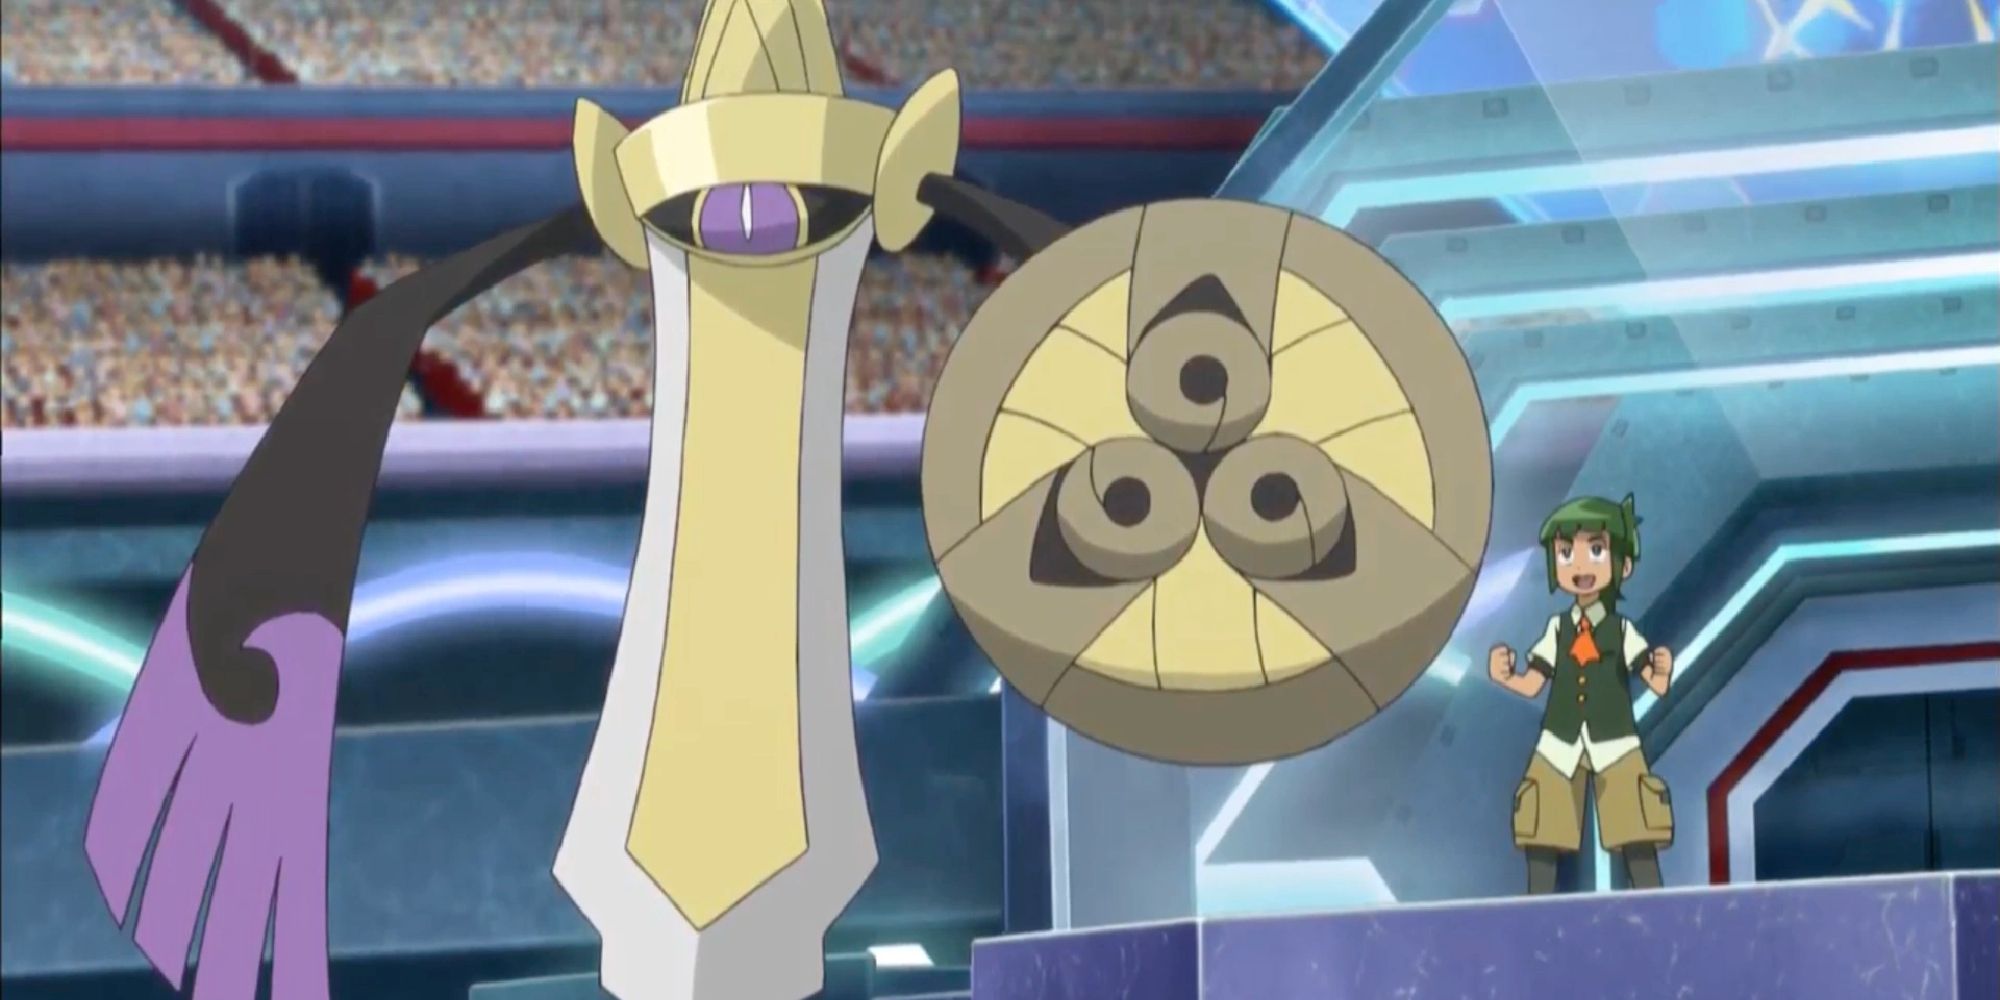 Aegislash sent out to battle in the anime